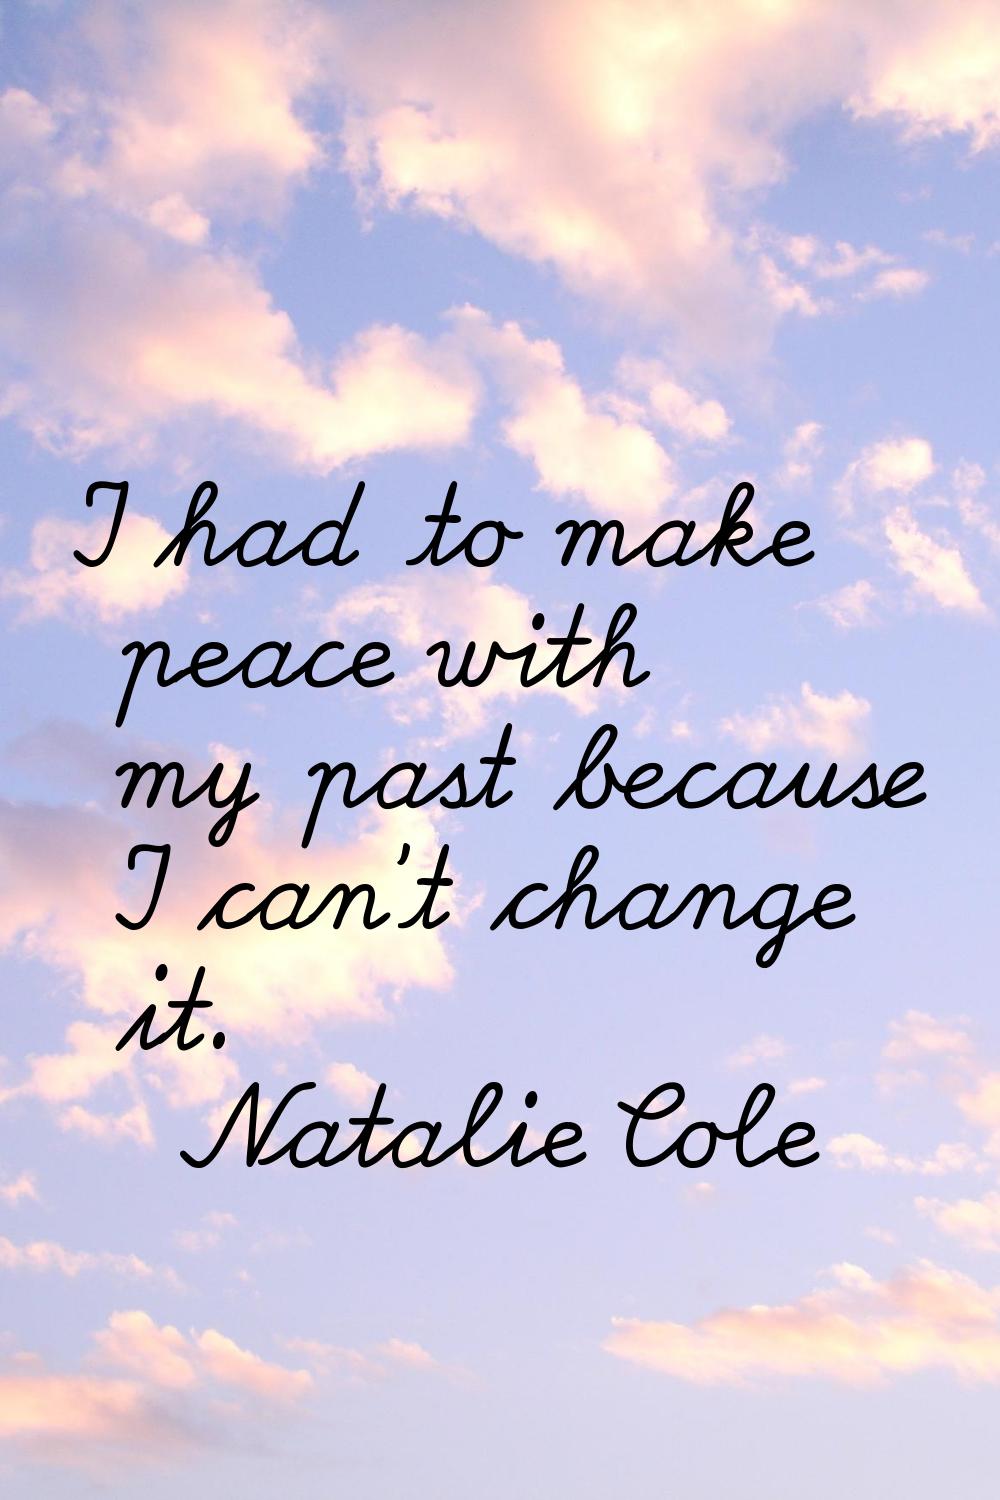 I had to make peace with my past because I can't change it.